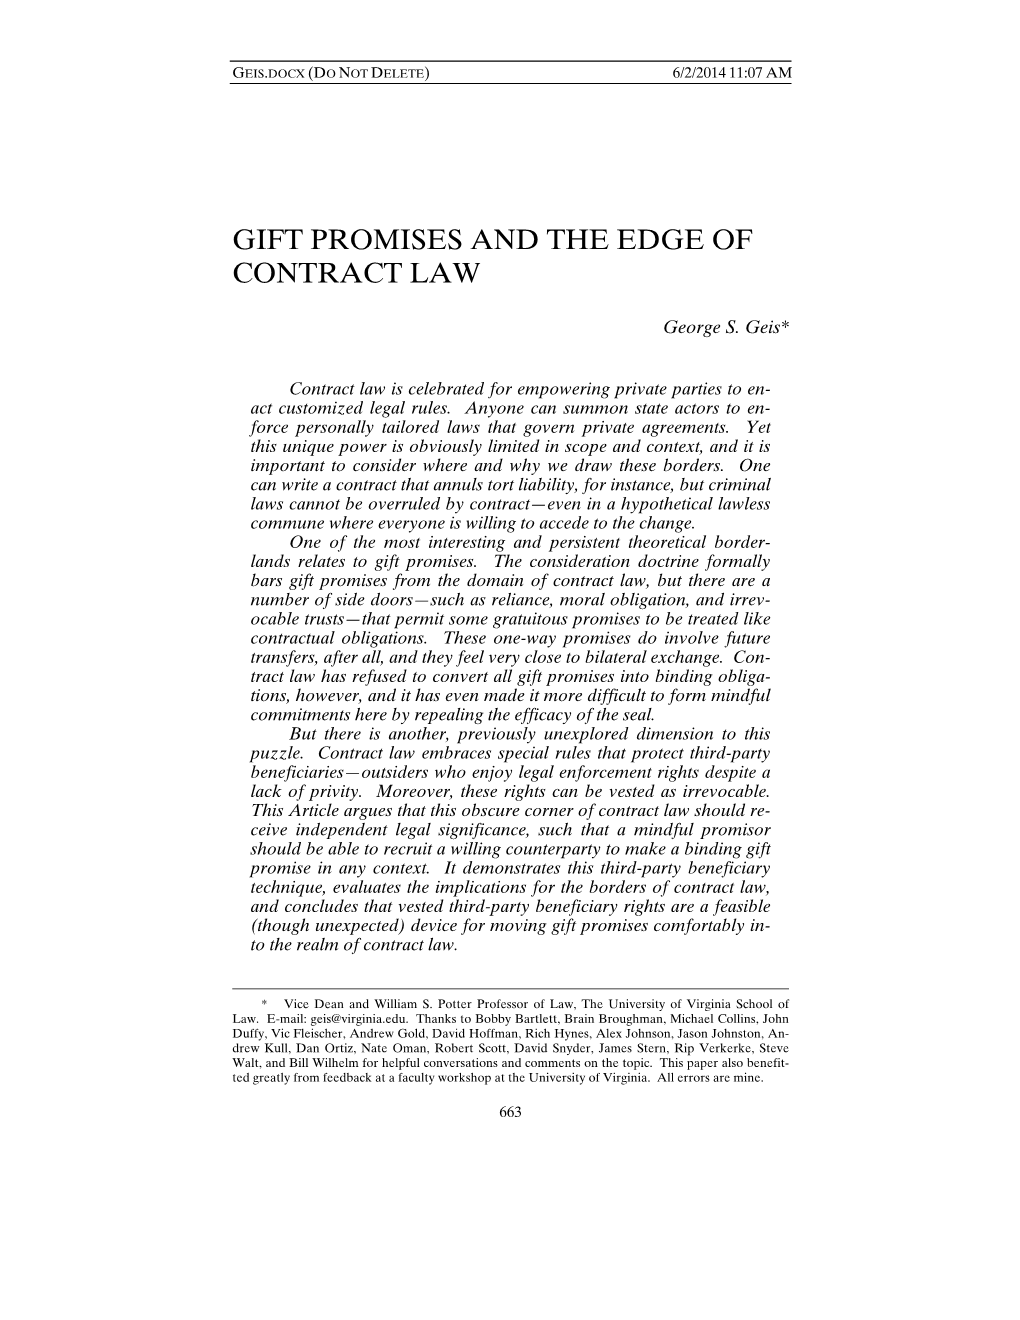 Gift Promises and the Edge of Contract Law